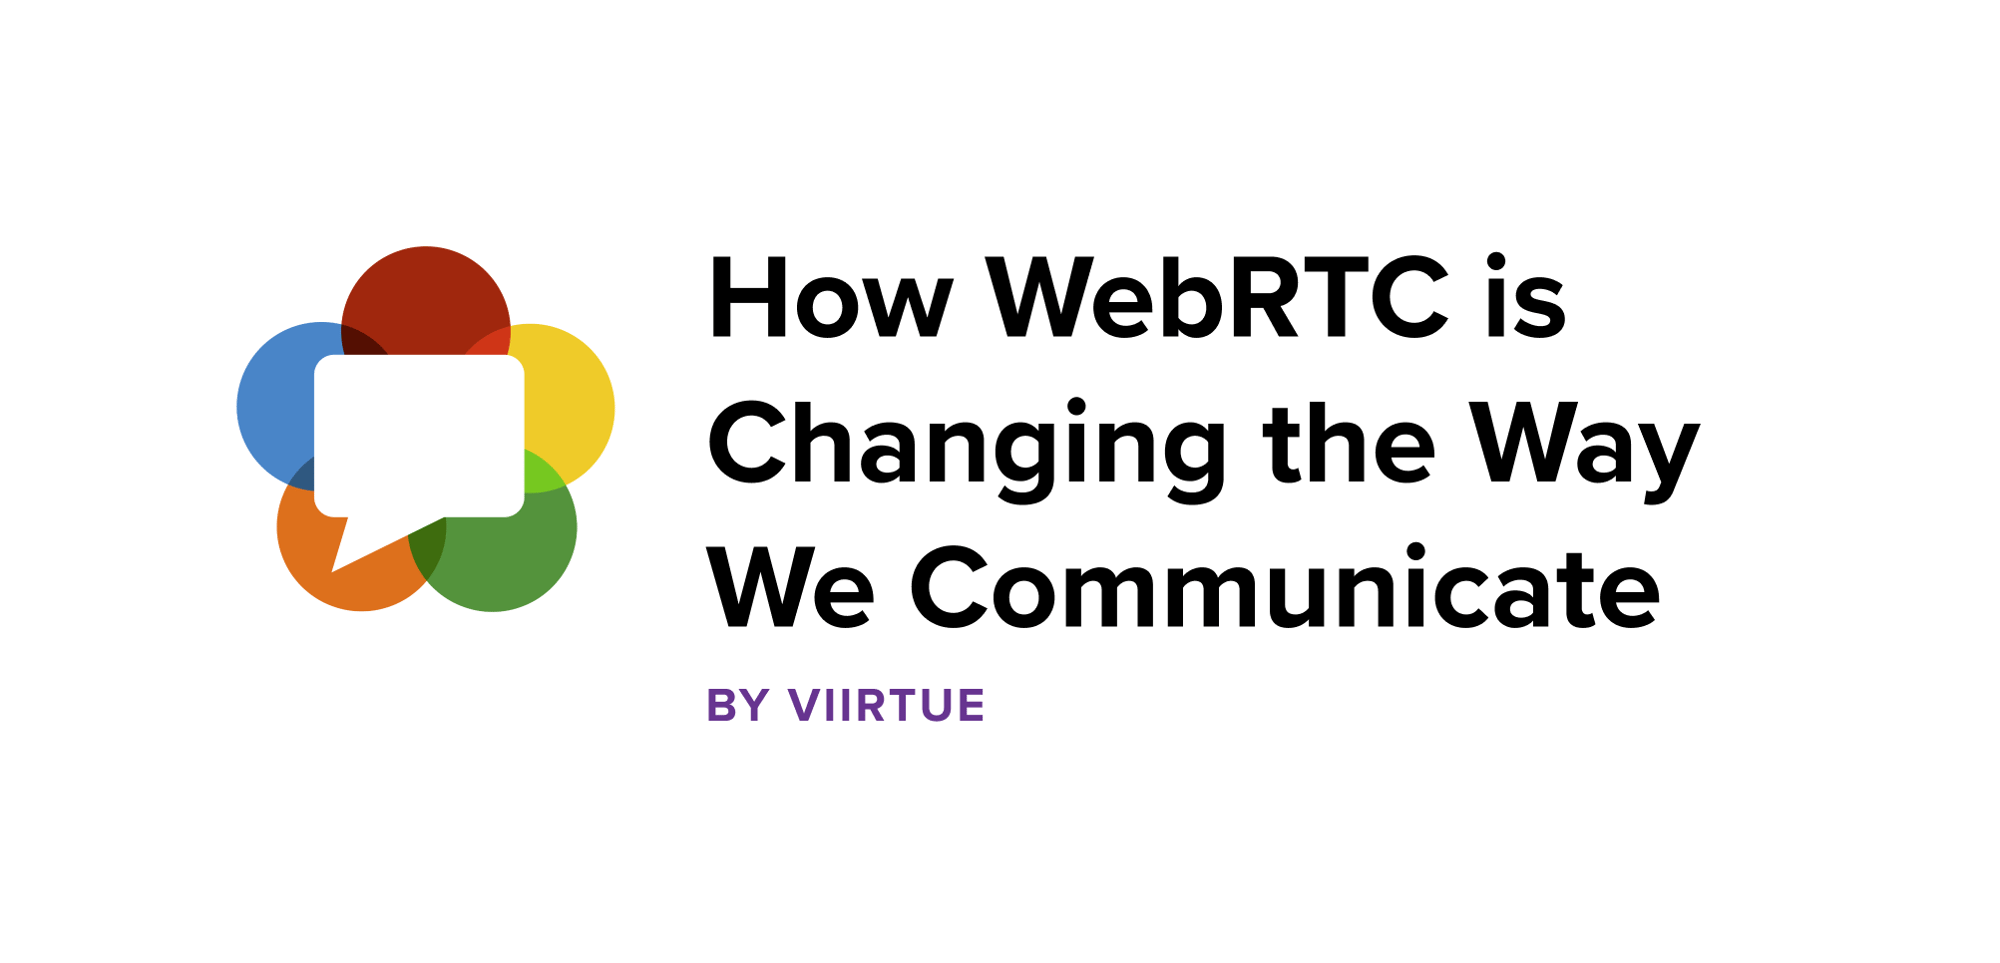 How WebRTC is changing the way we communicate